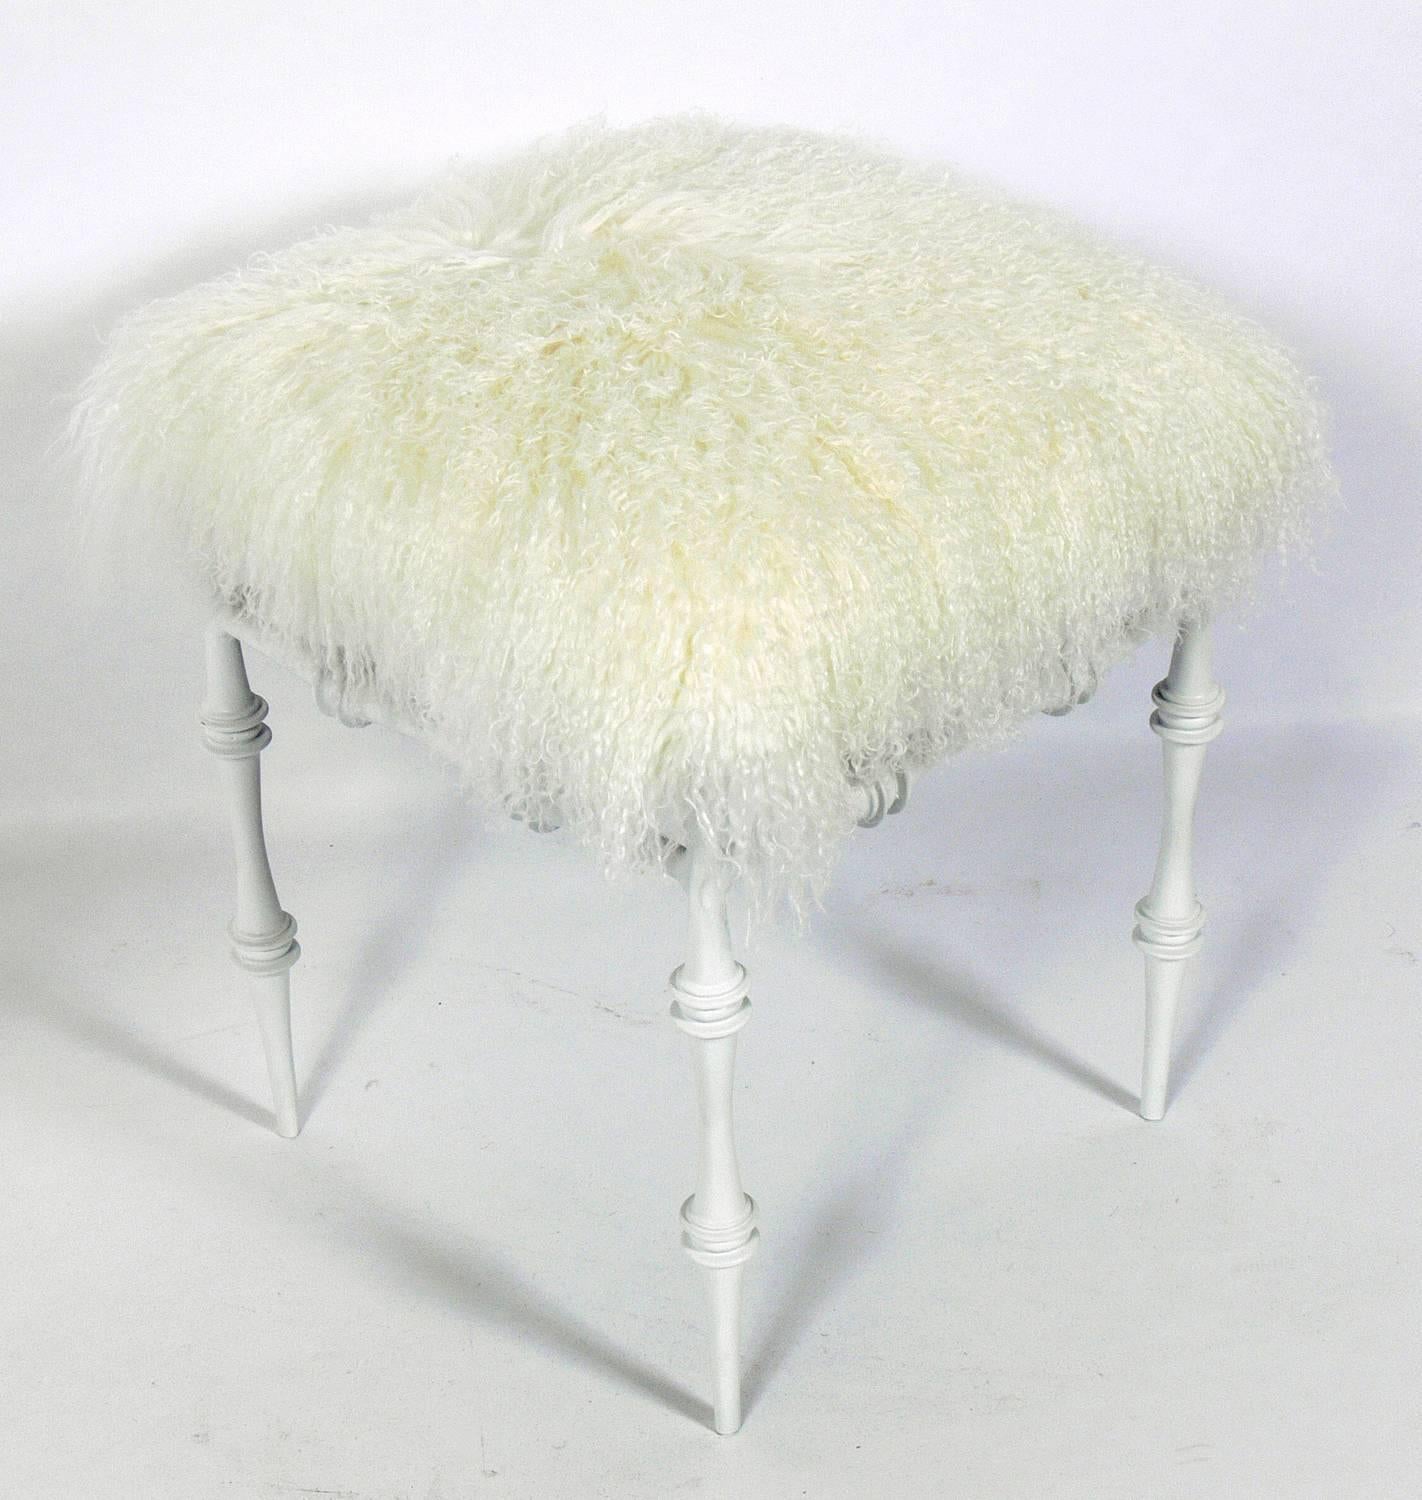 Sculptural modernist stool in Mongolian wool, American, circa 1950s. It has been repainted and reupholstered in luxuriously soft Mongolian wool.